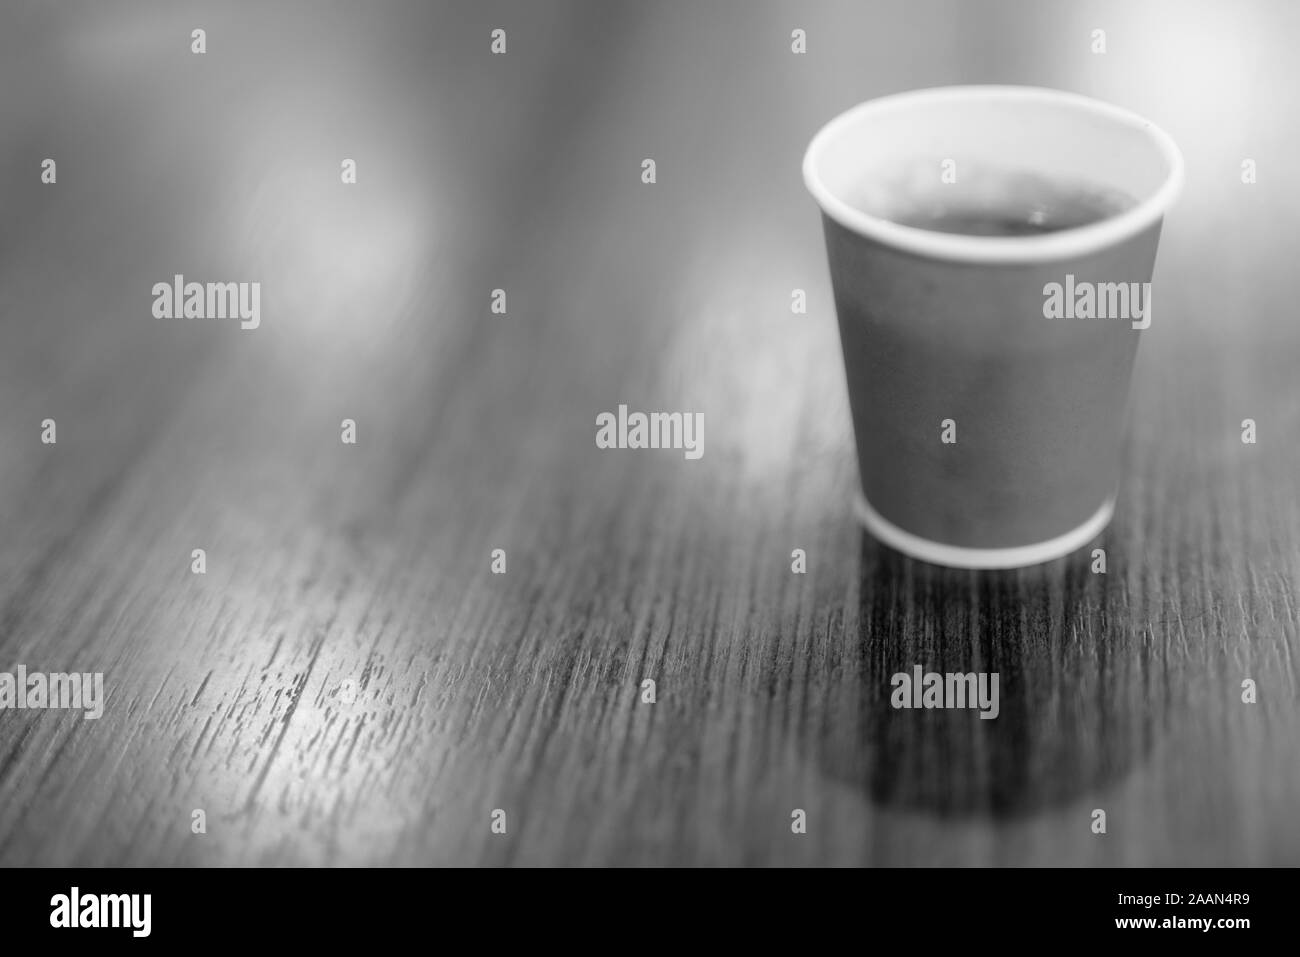 Hot Coffee In Paper Cup Placed On Wooden Table In Black And White Stock Photo